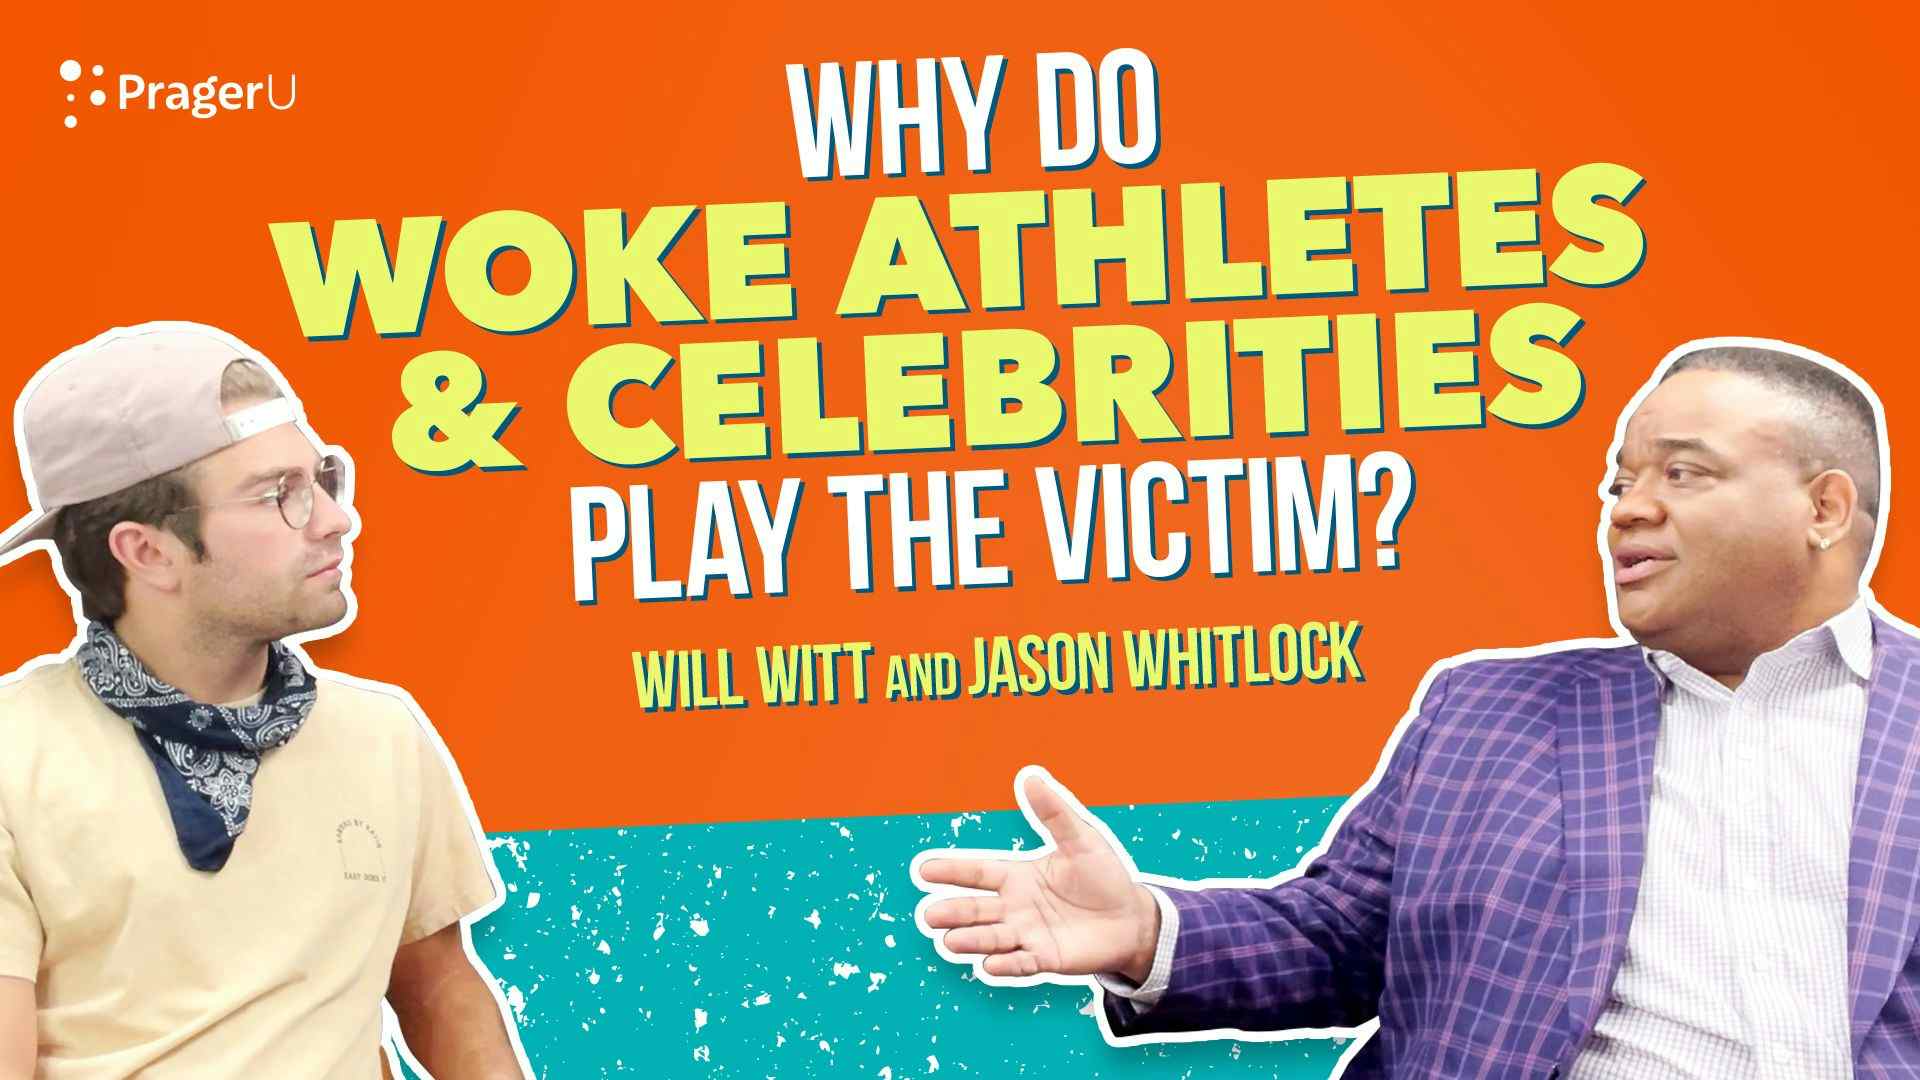 Why Do Woke Athletes and Celebrities Play the Victim?